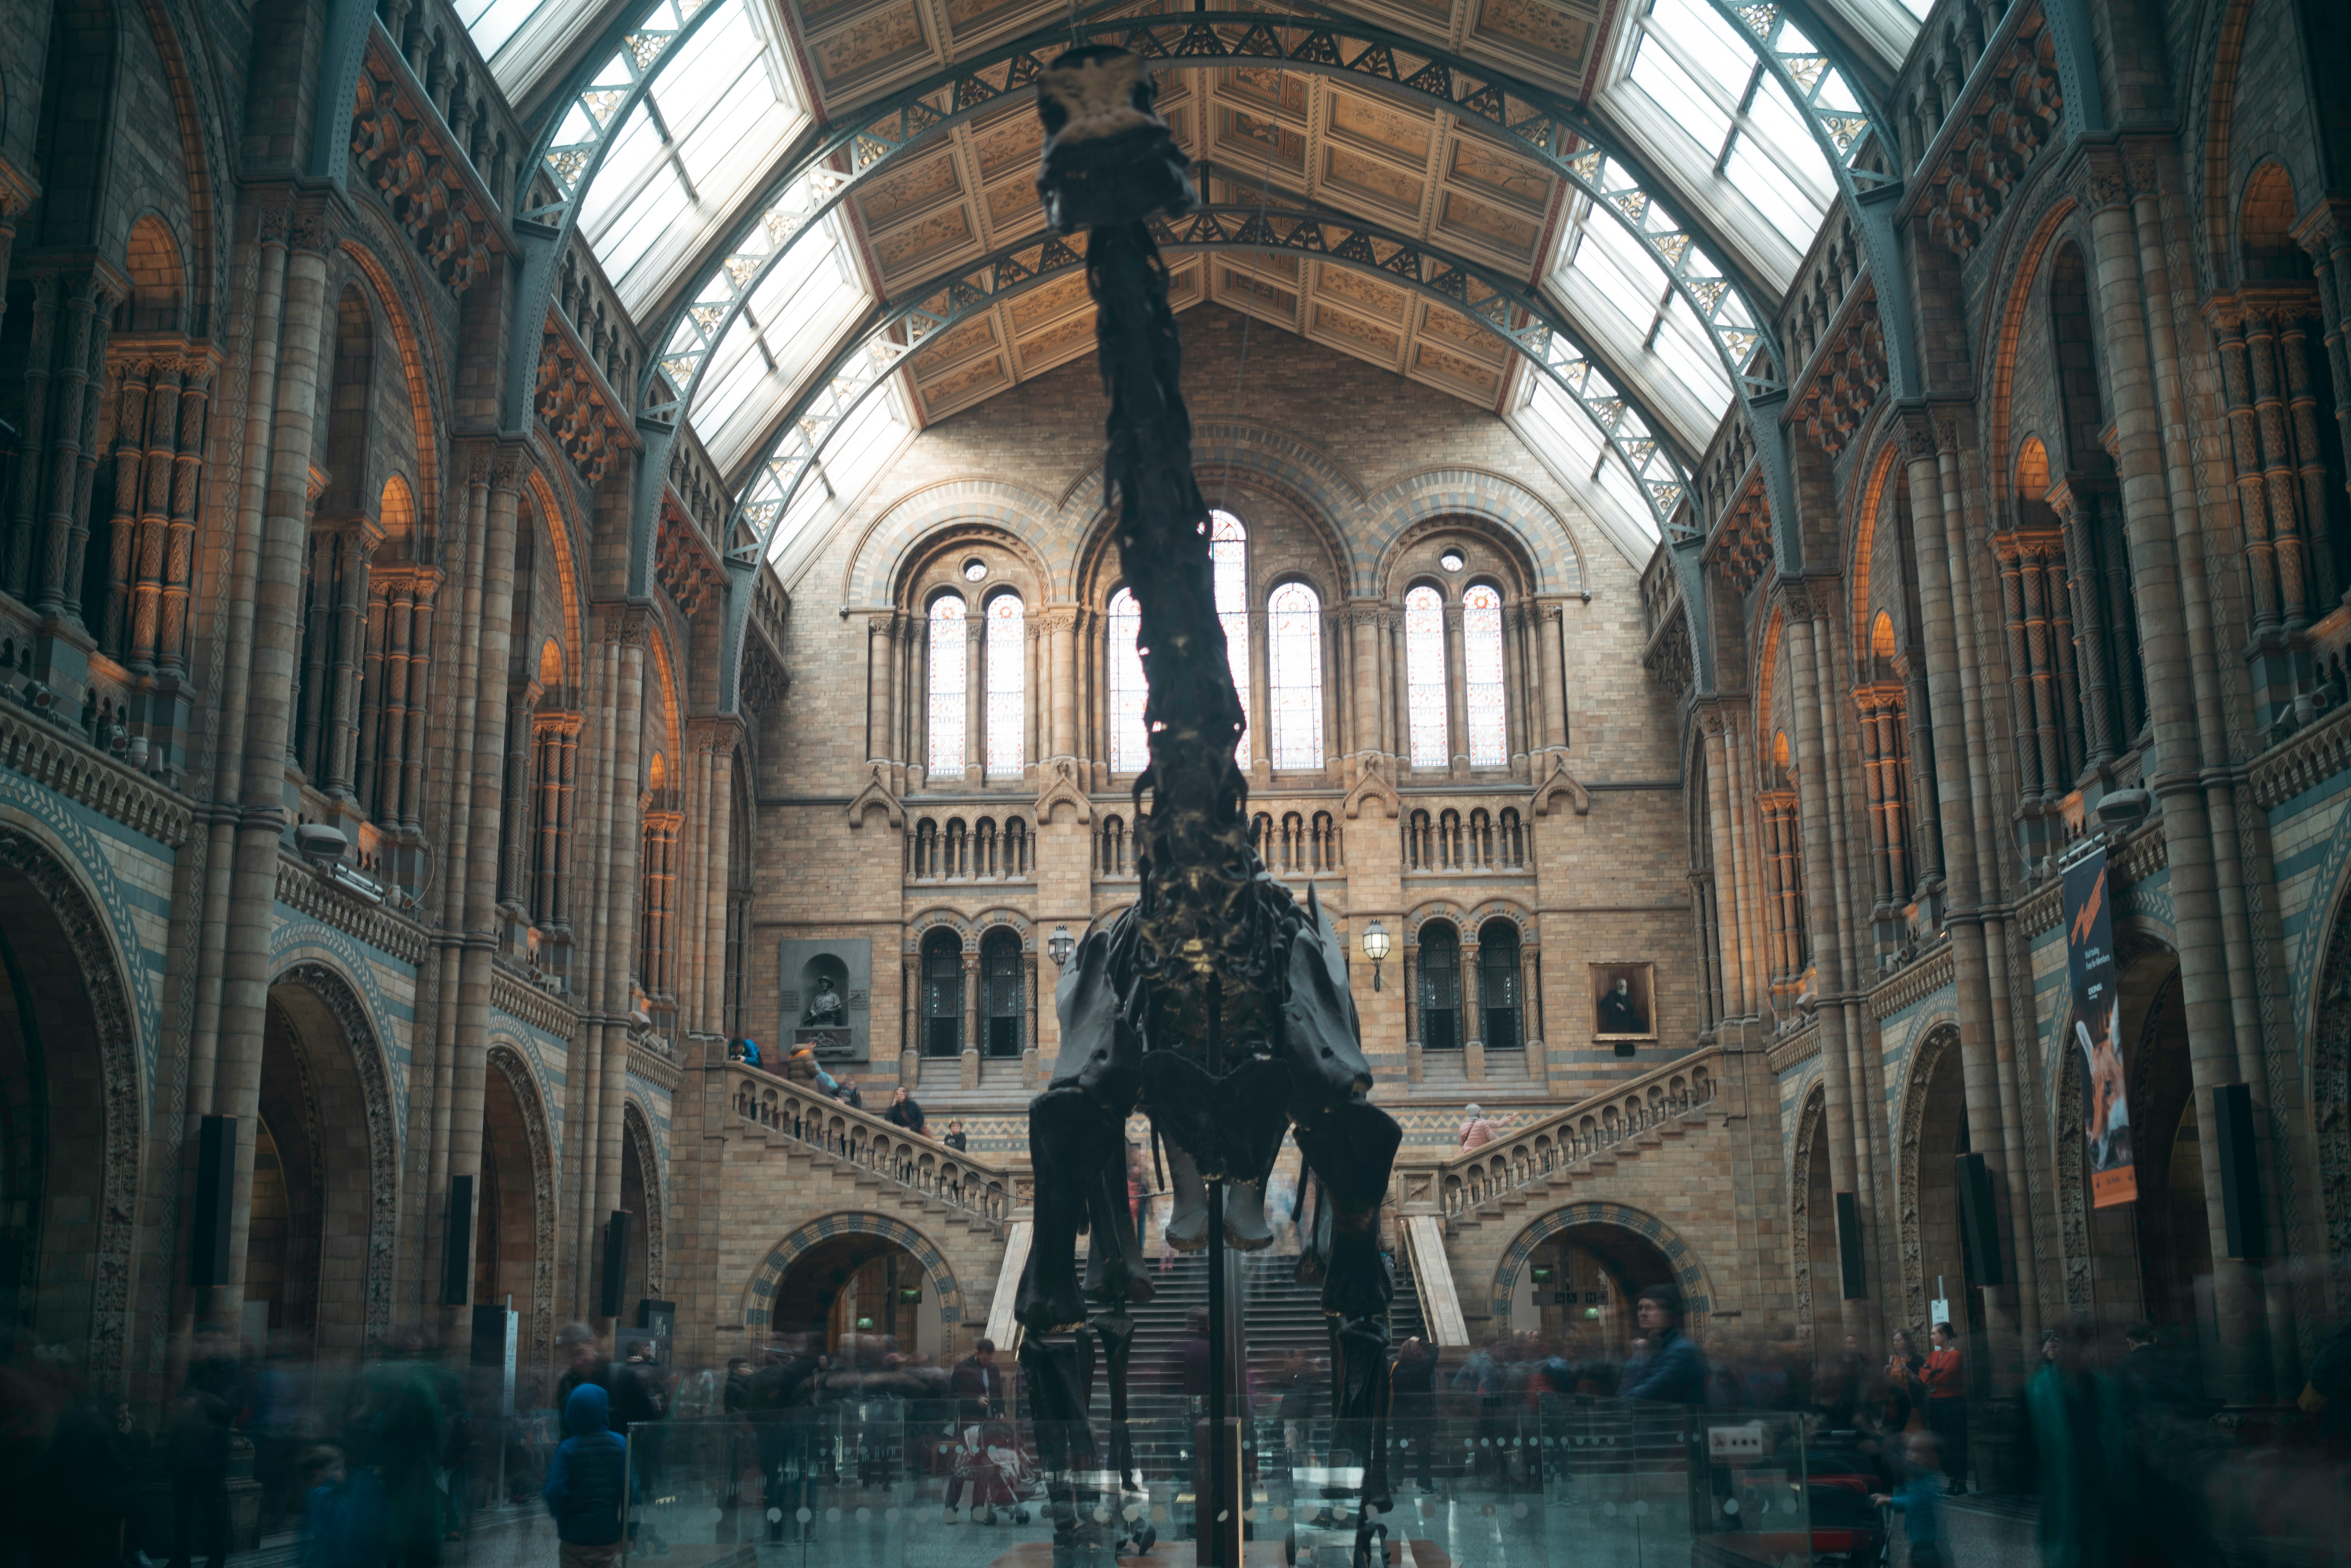 black metal dinosaur inside museum surrounded with people during daytime